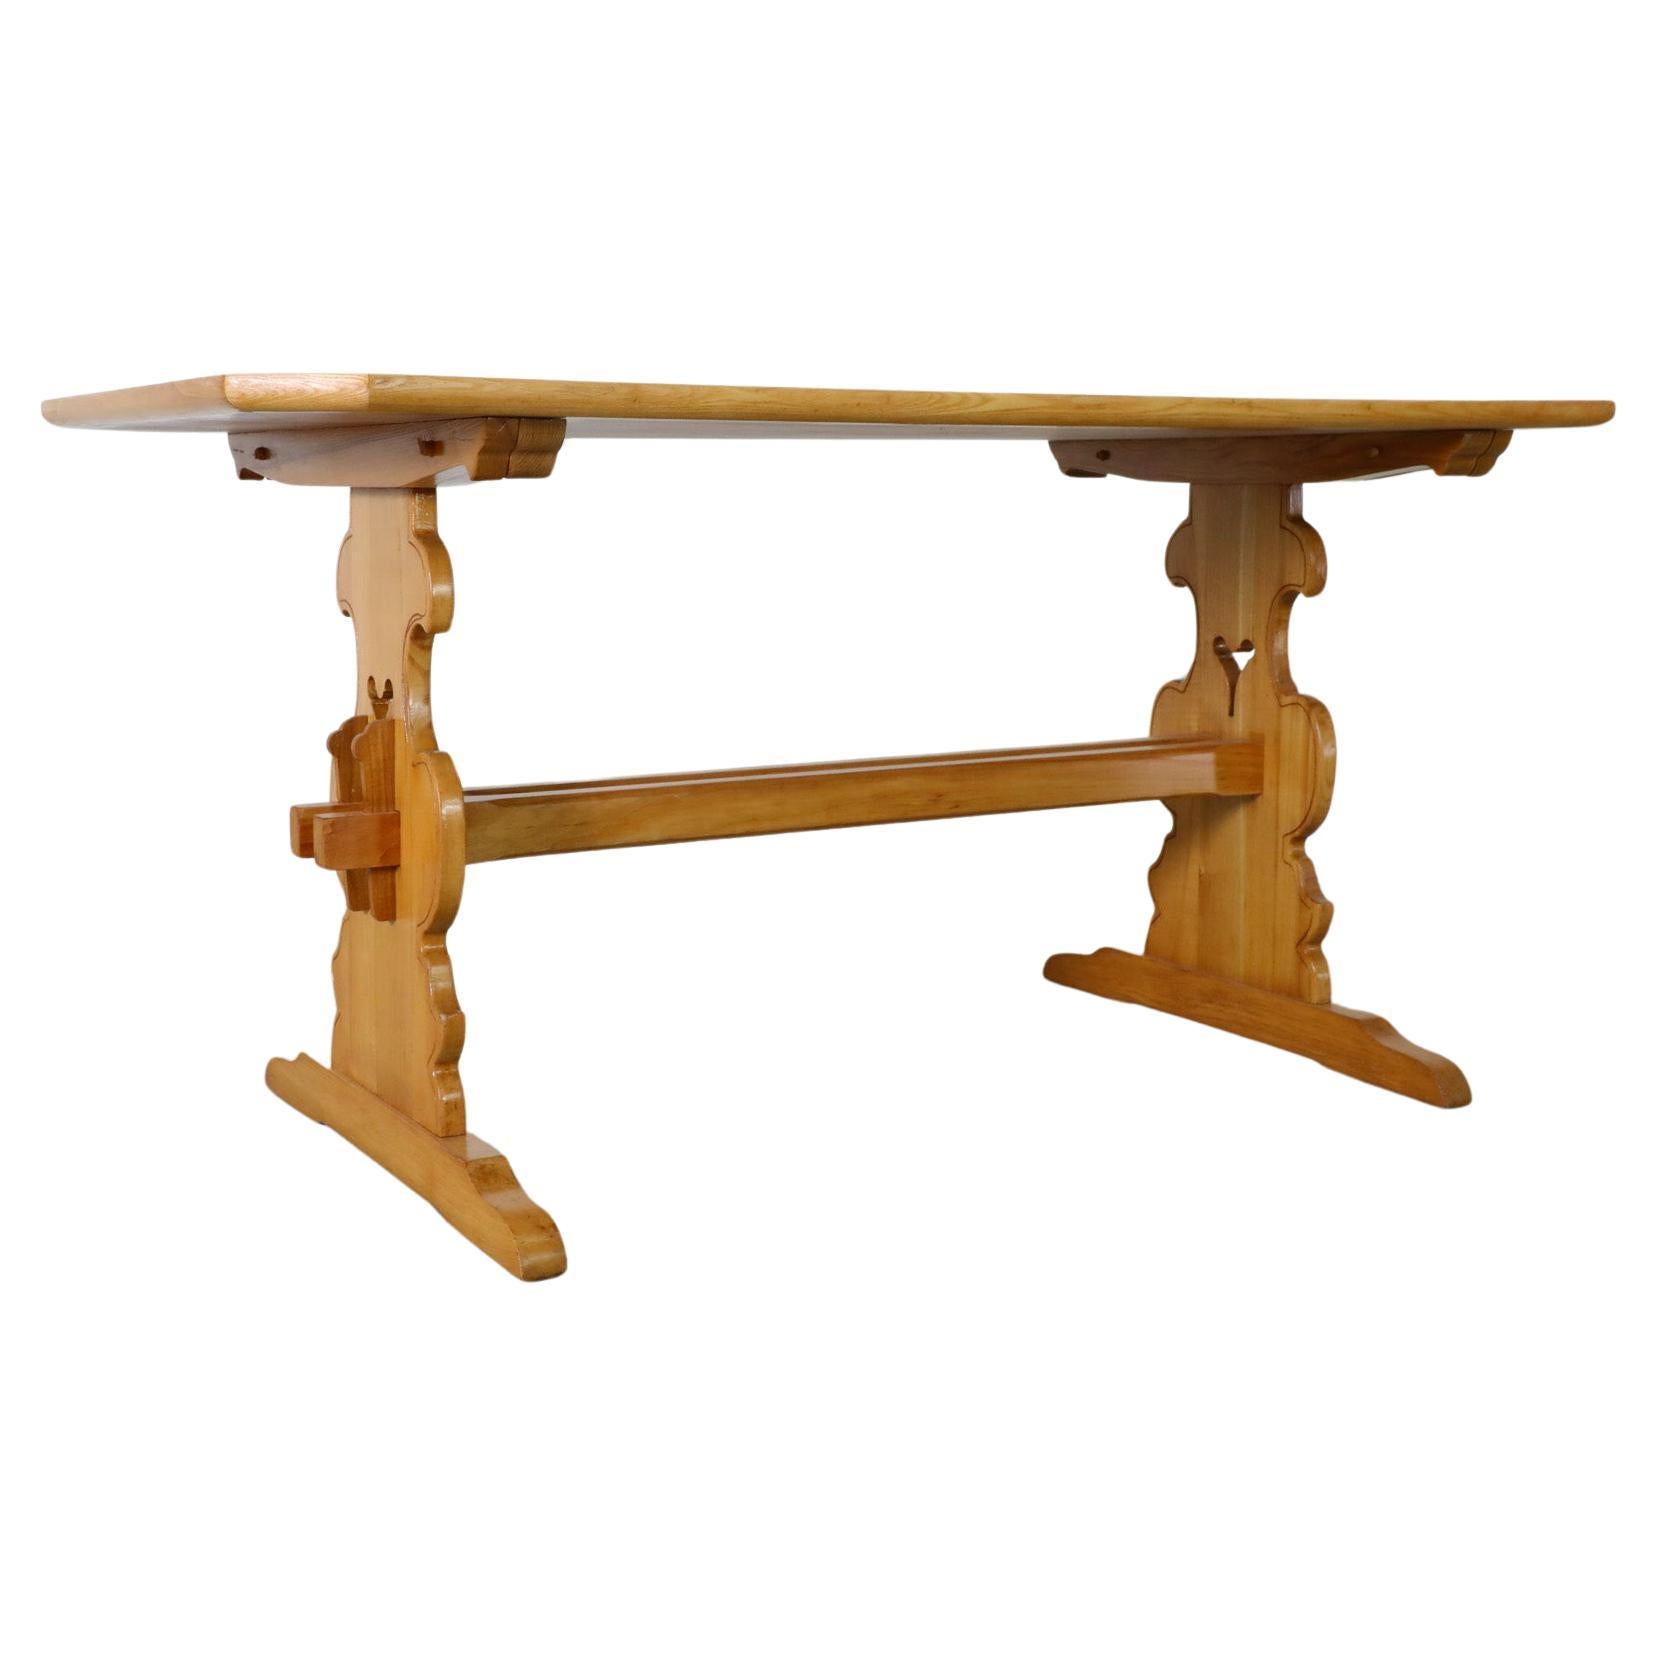 Ornate Hand-Carved Oak Brutalist Tyrolean Style Table with Trestle Base For Sale